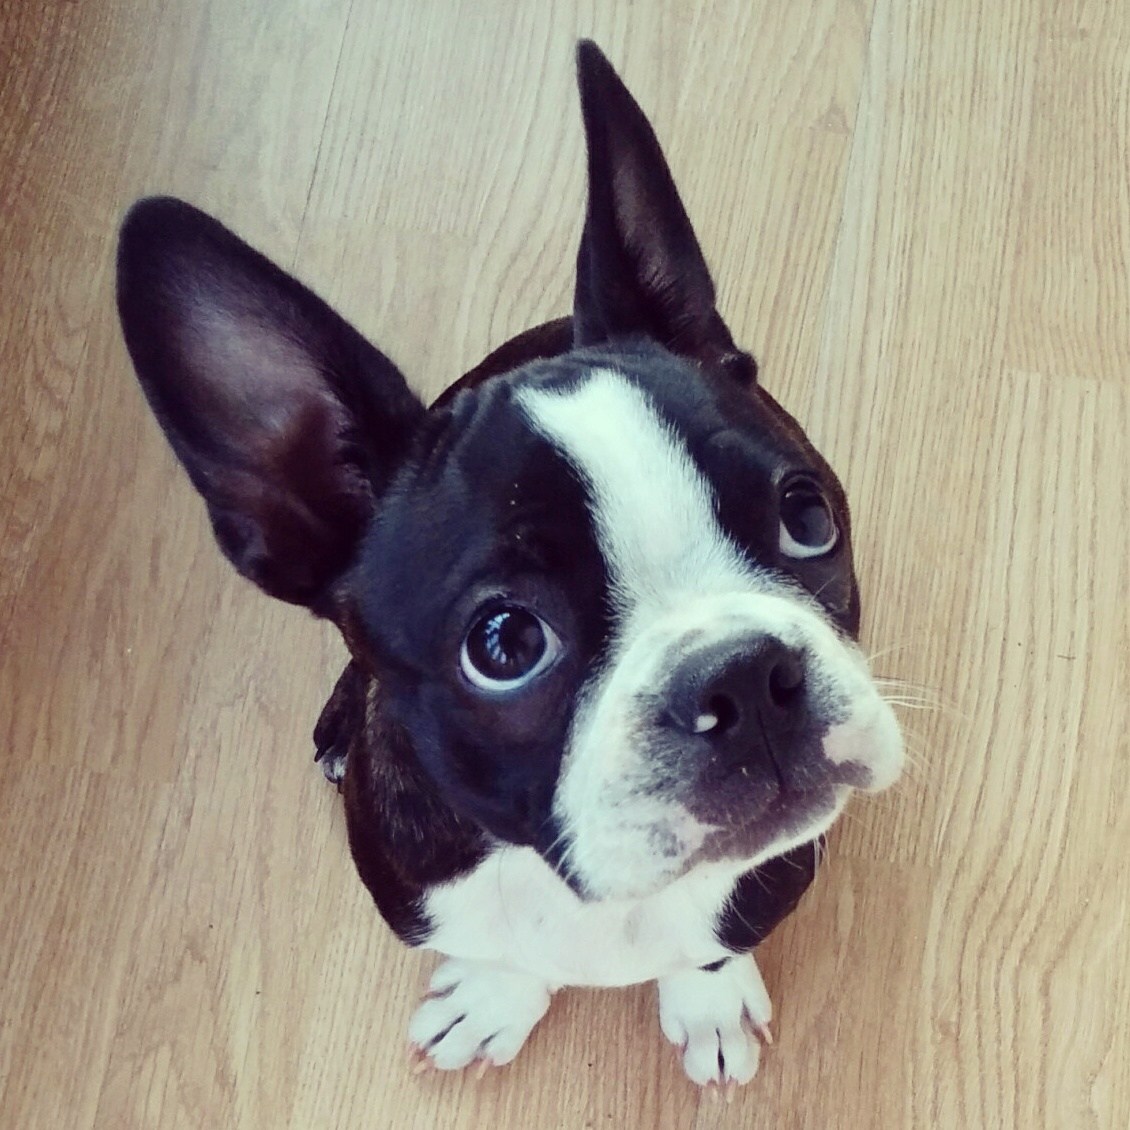 Boston Terrier sitting on the floor while looking up with its begging face